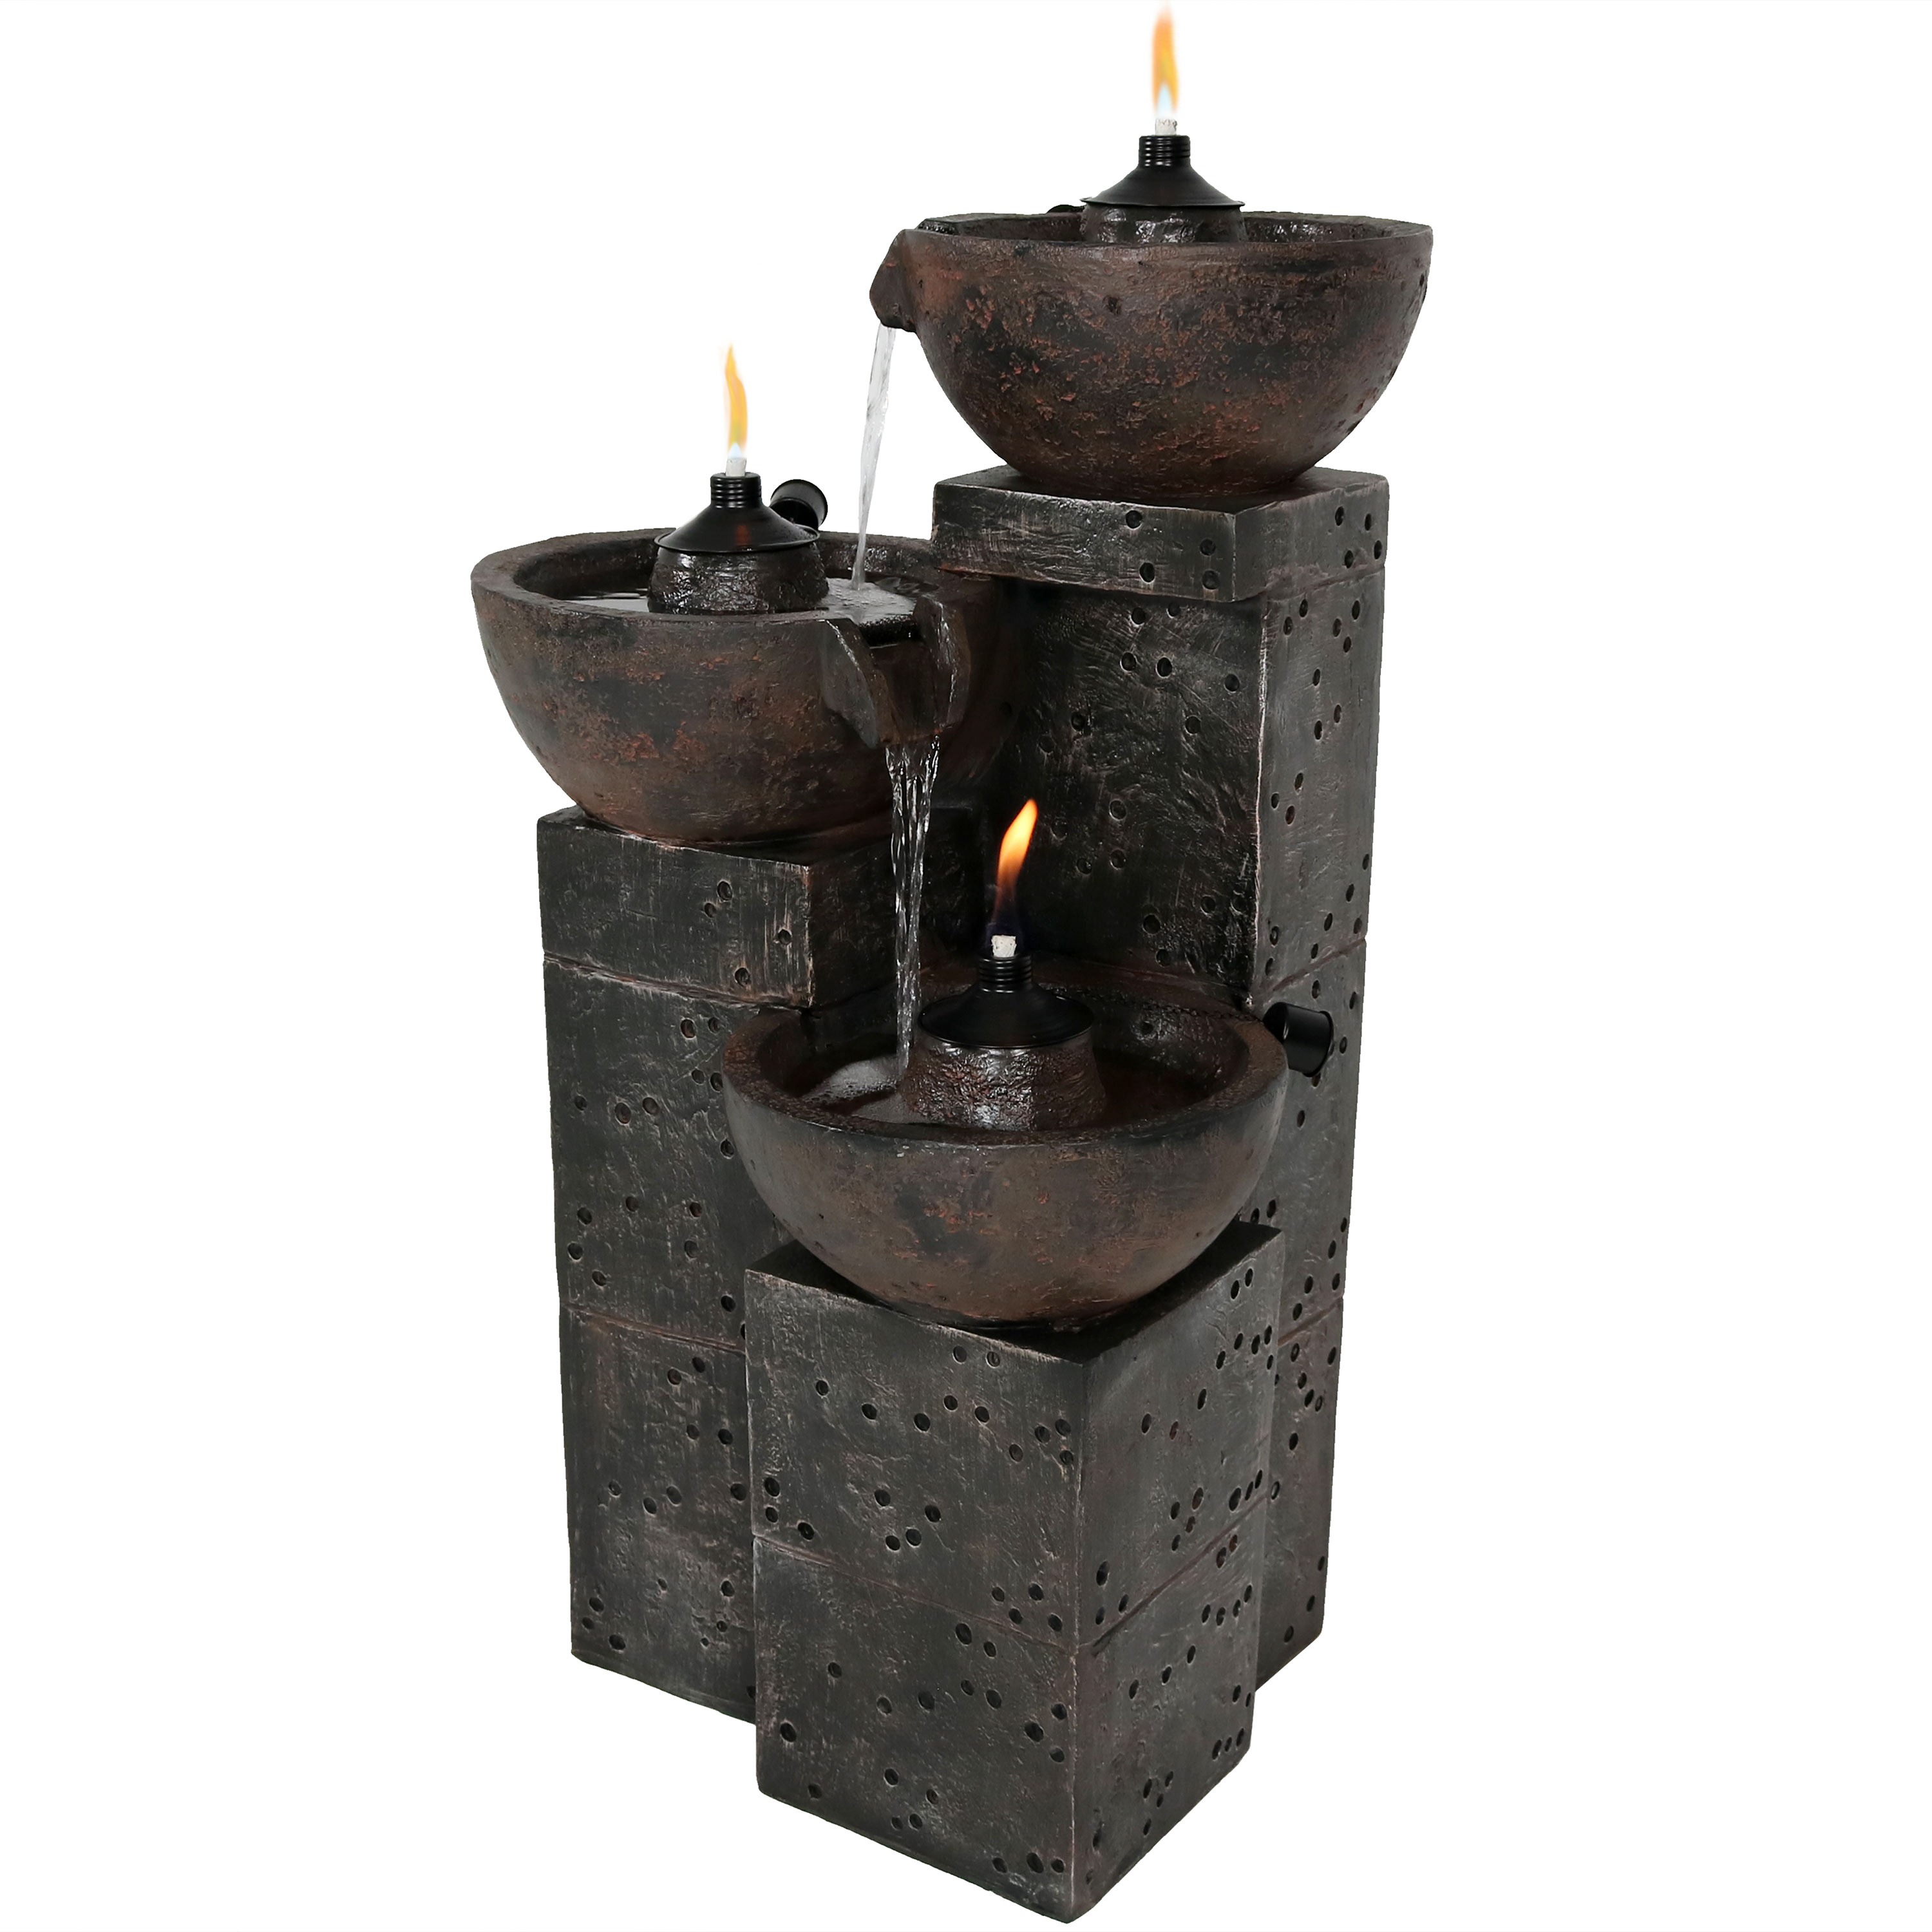 Sunnydaze 3-Tier Burning Bowls Outdoor Fire and Water Fountain - 34-Inch